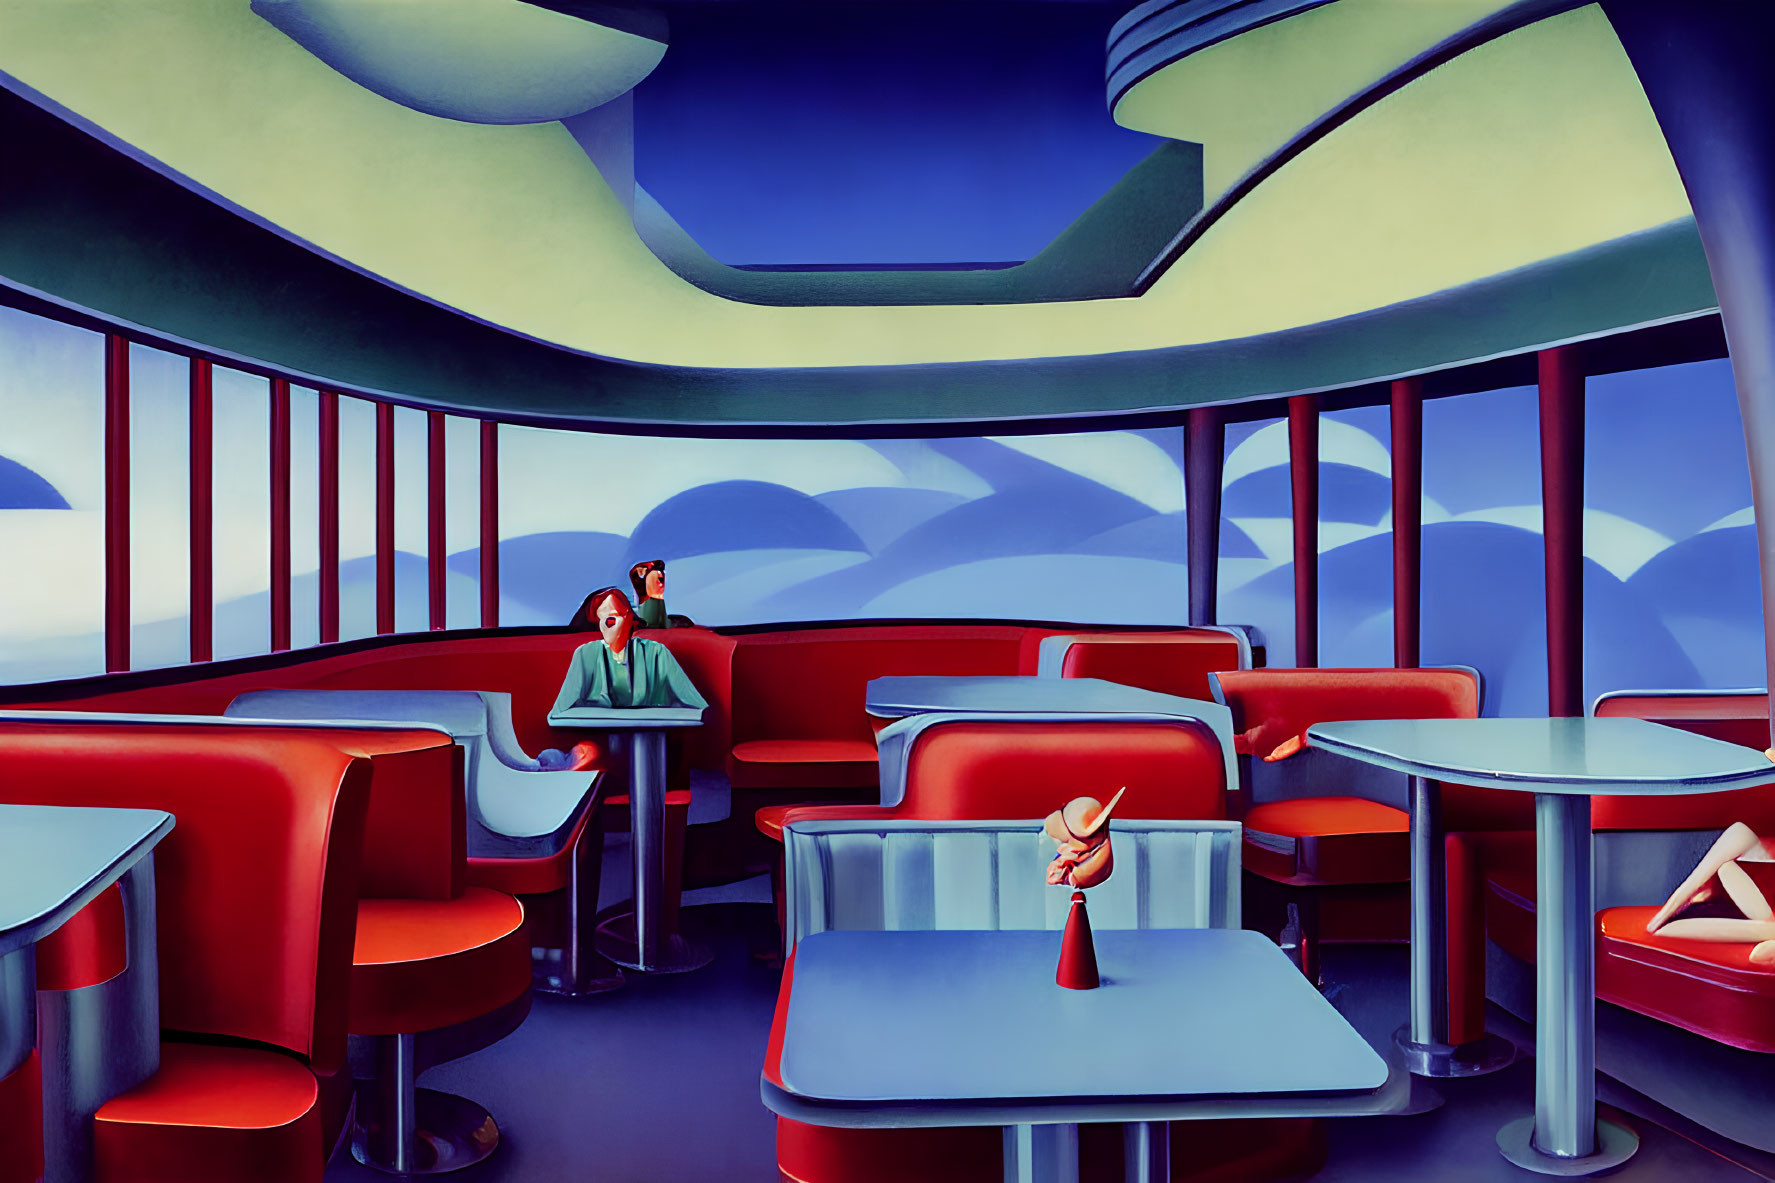 Stylized painting of woman in retro diner with large windows and jukebox